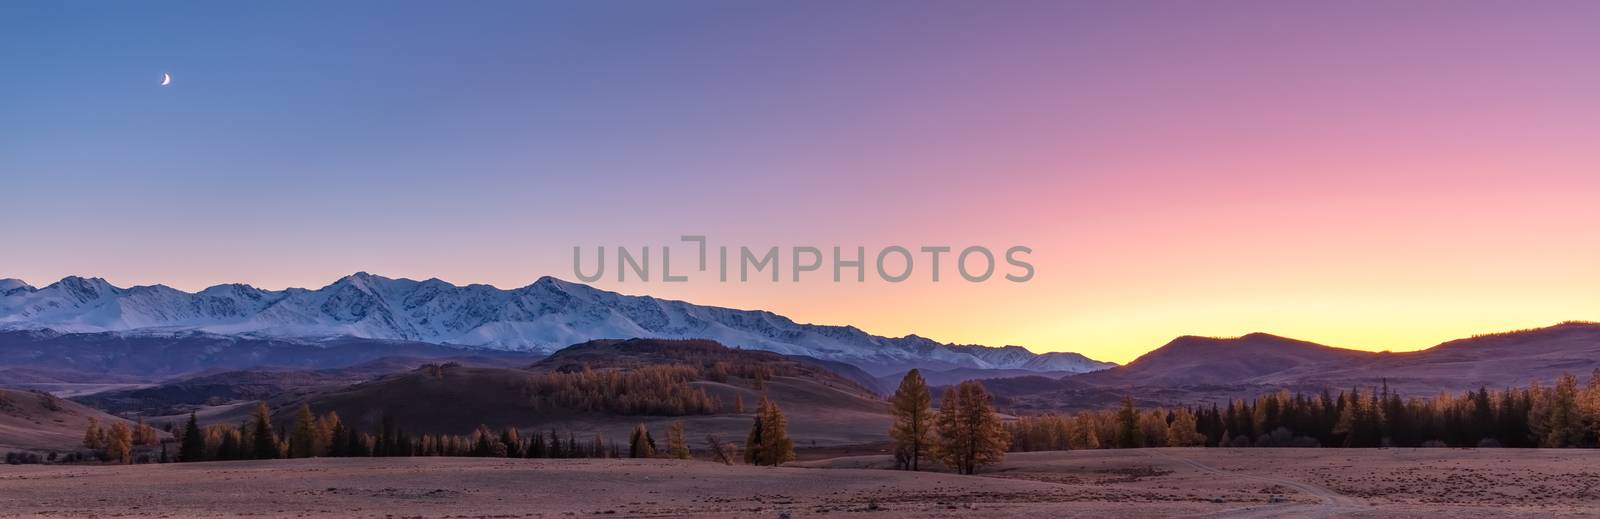 Beautiful panorama of a valley full of trees and white snowy mountains in the background. Sky is blue, orange, pink, and purple. Blue hour. Fall time. Sunset. Altai mountains, Russia.